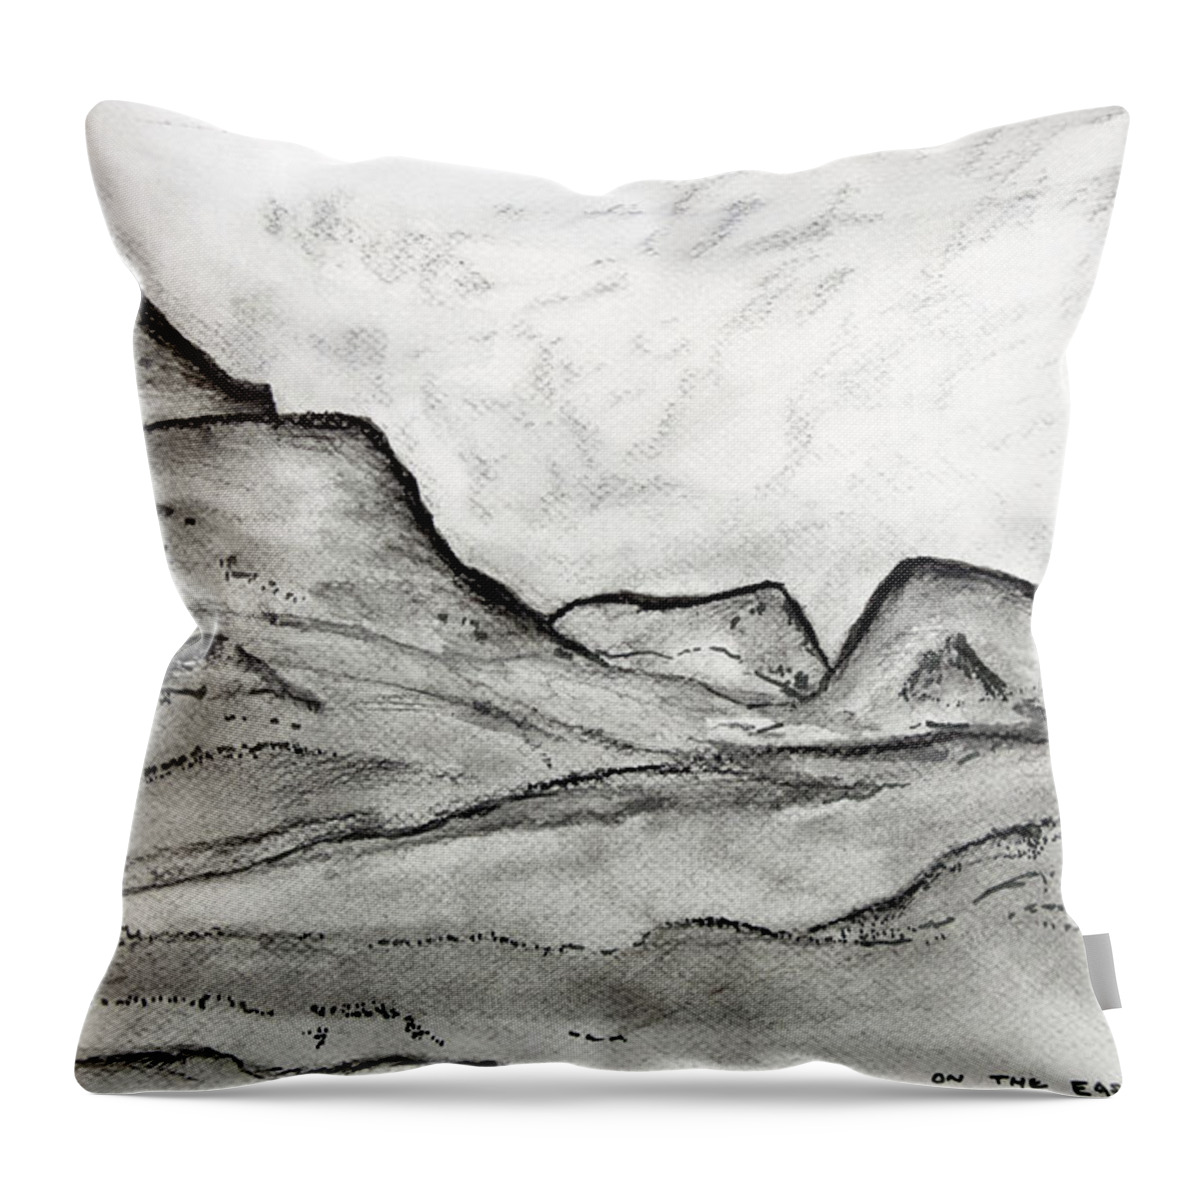  Throw Pillow featuring the painting On The East Face by Kathleen Barnes